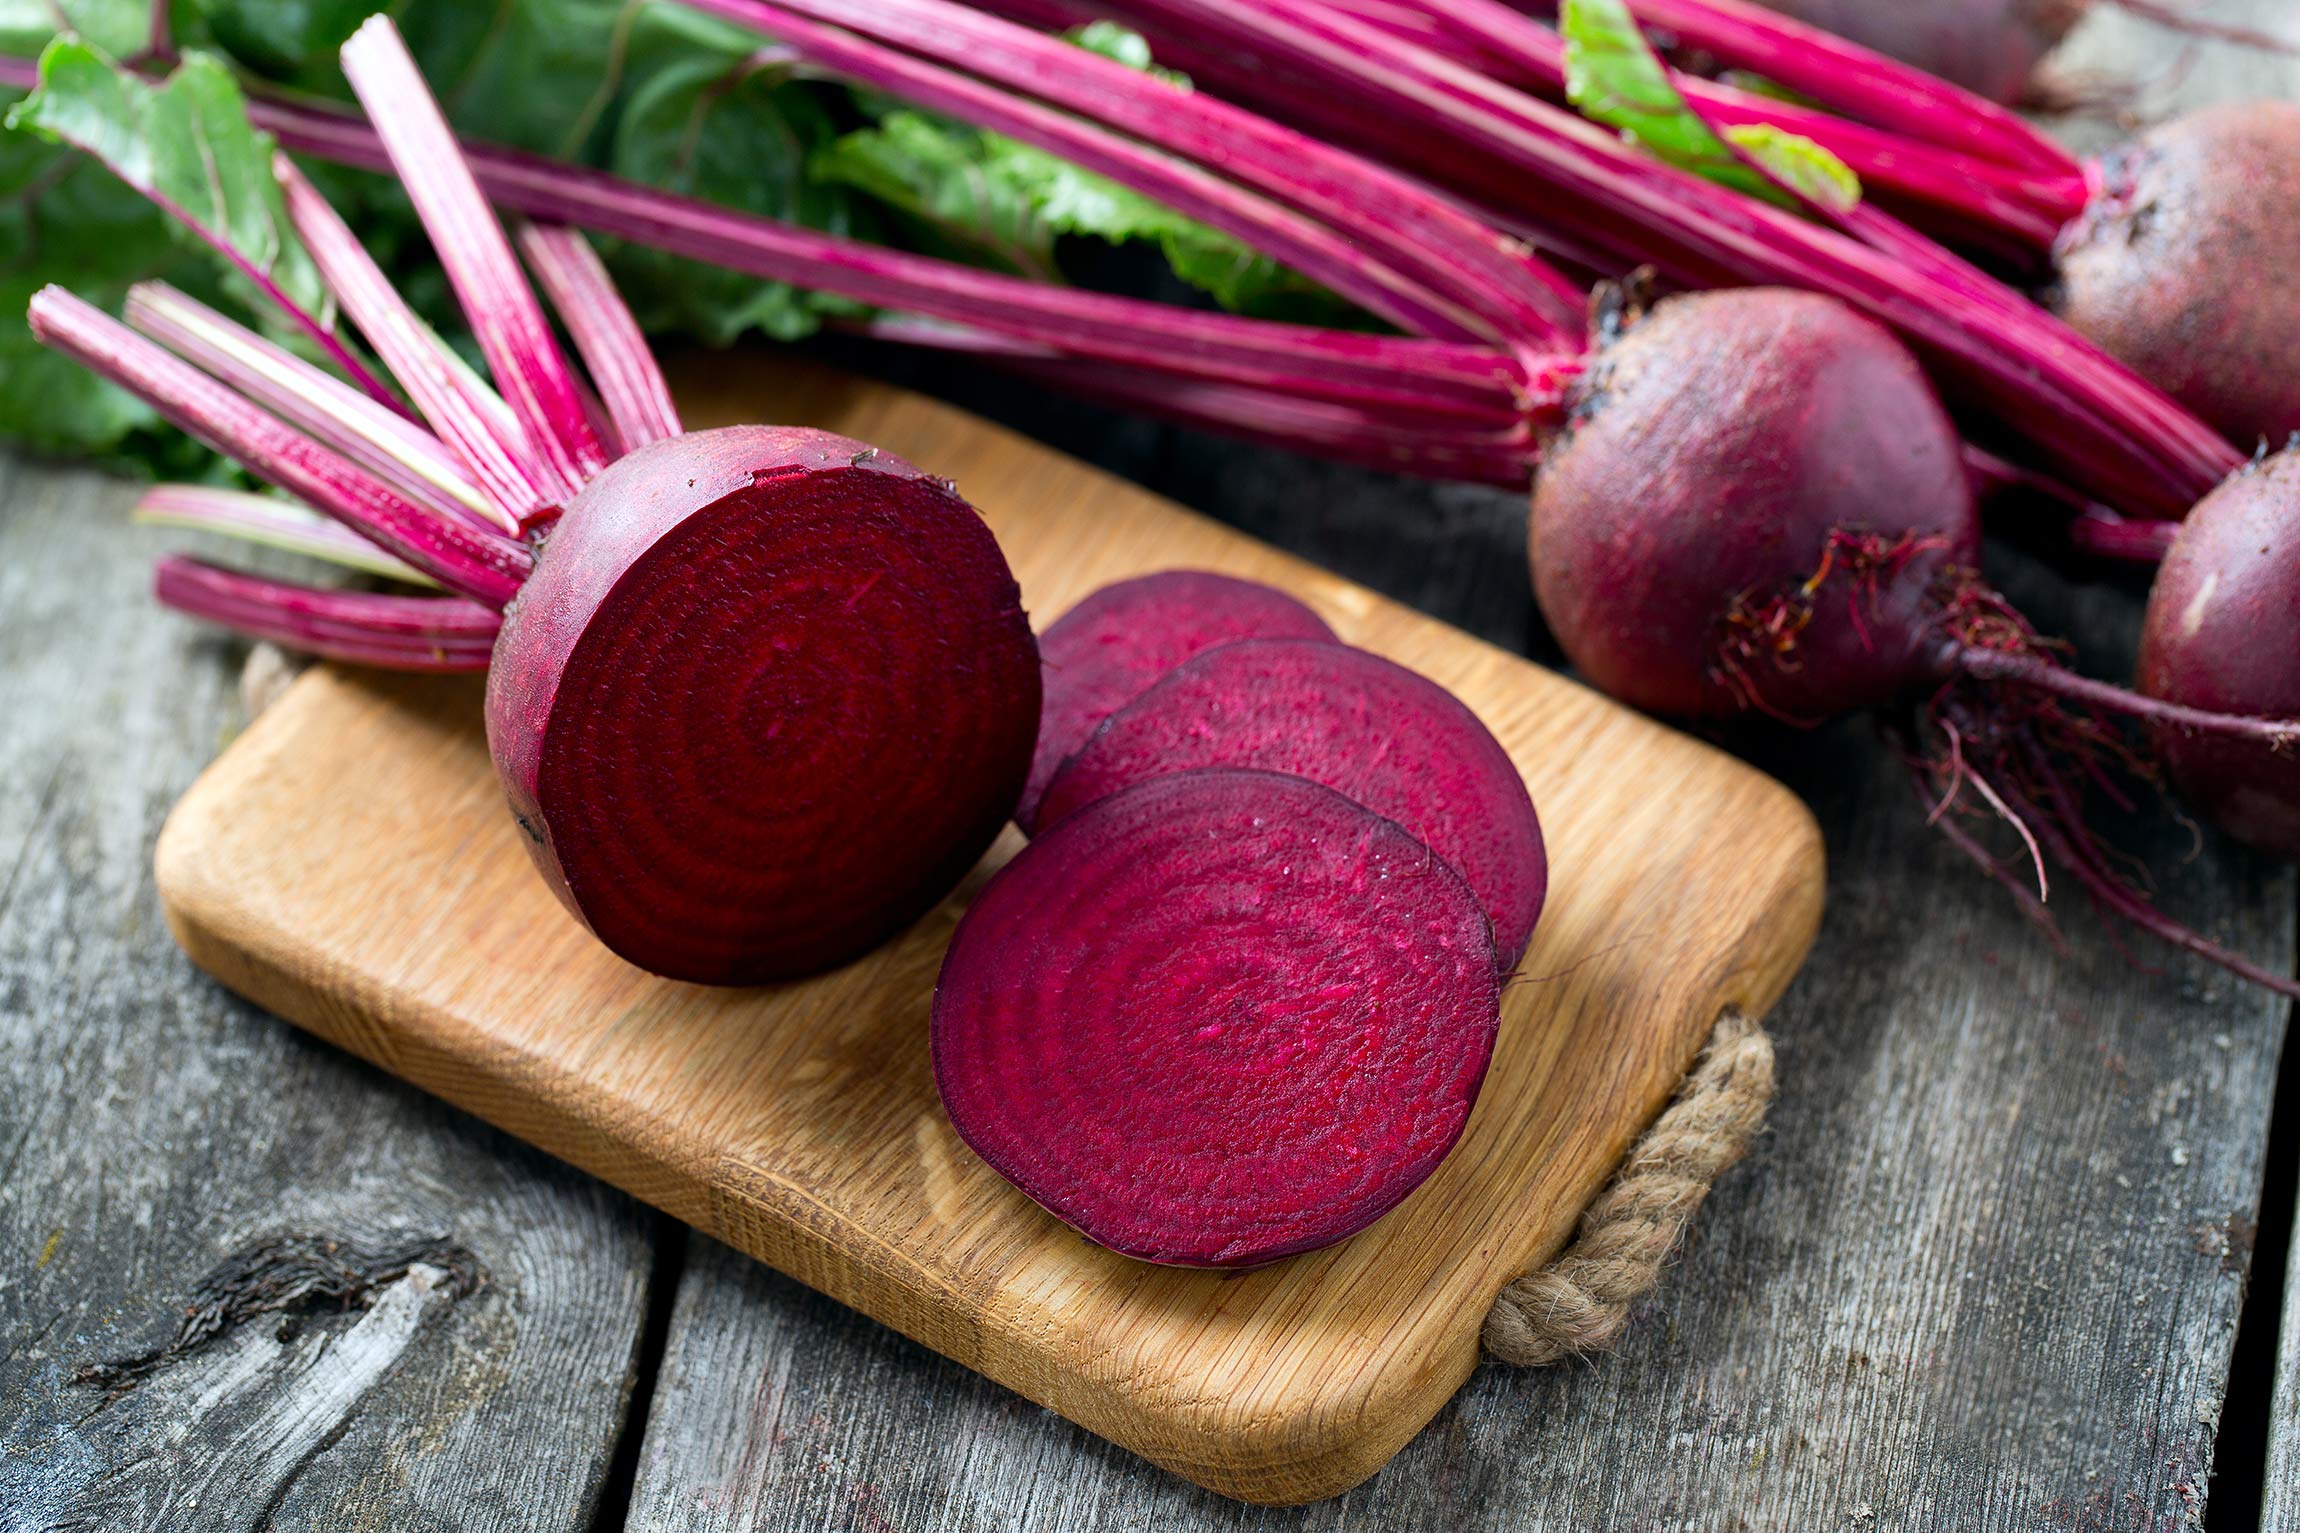 Fall fruits and vegetables: what's in season? Beets